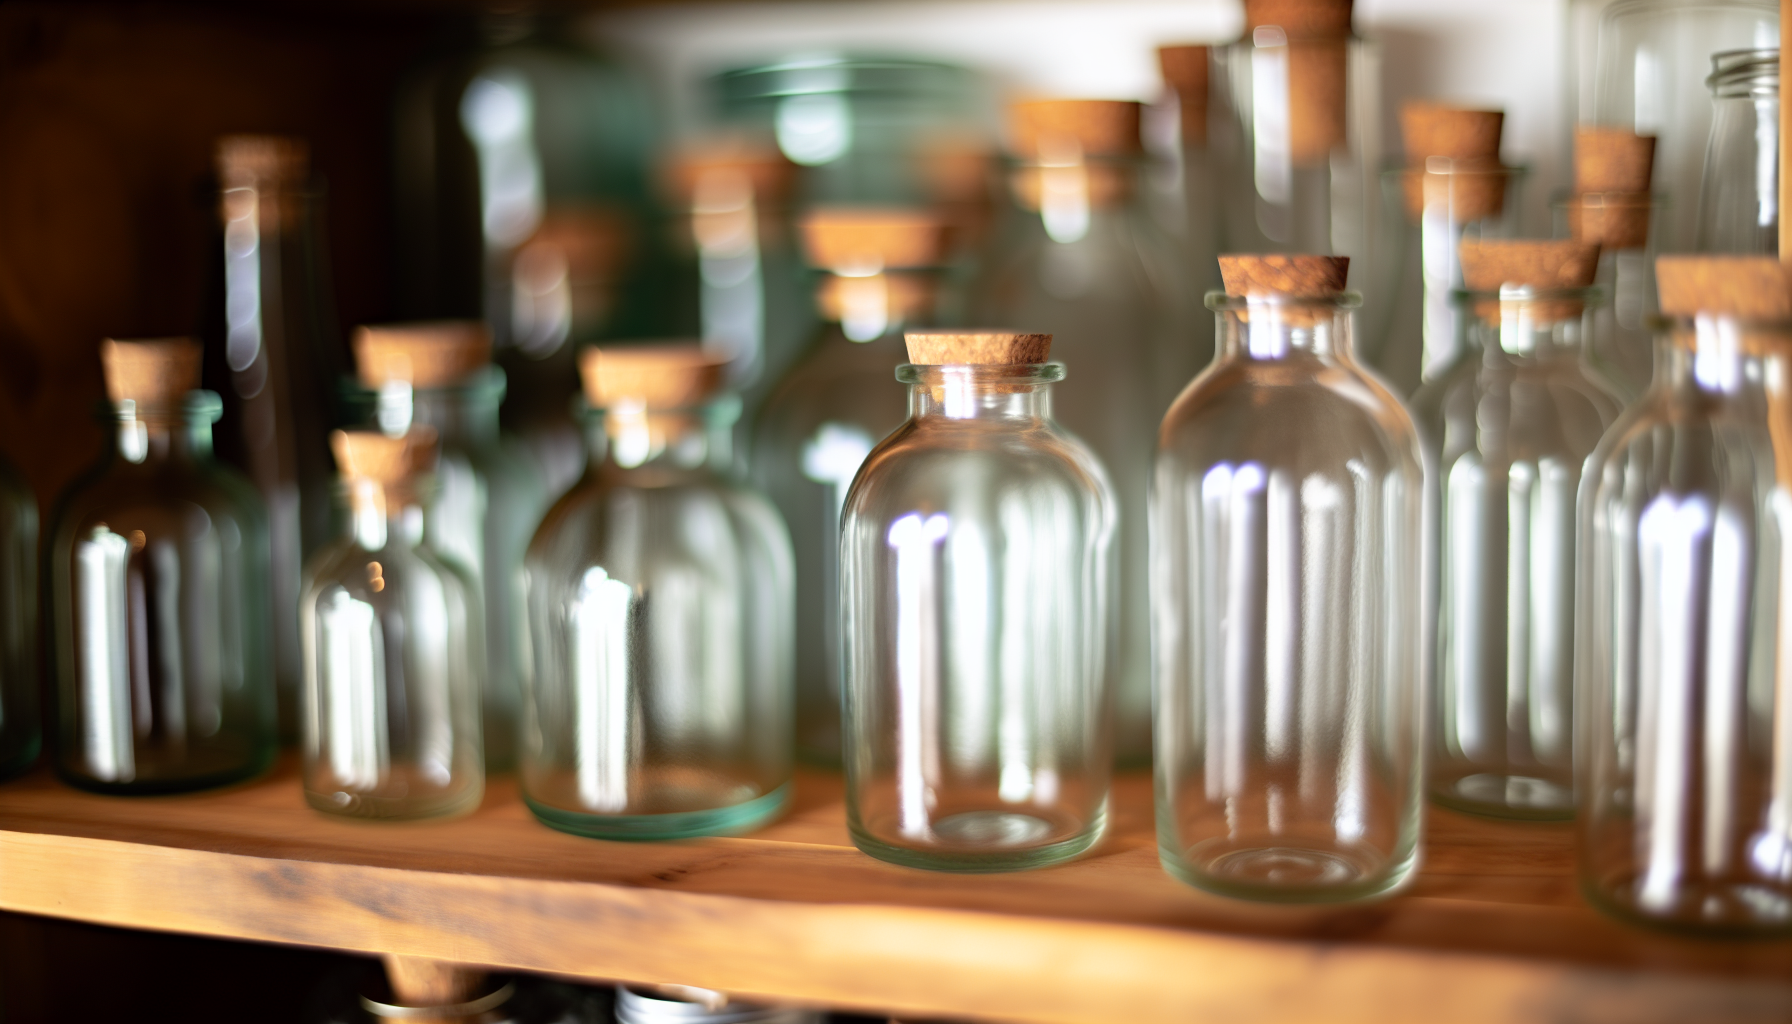 Bottles and containers for storing homemade shampoo